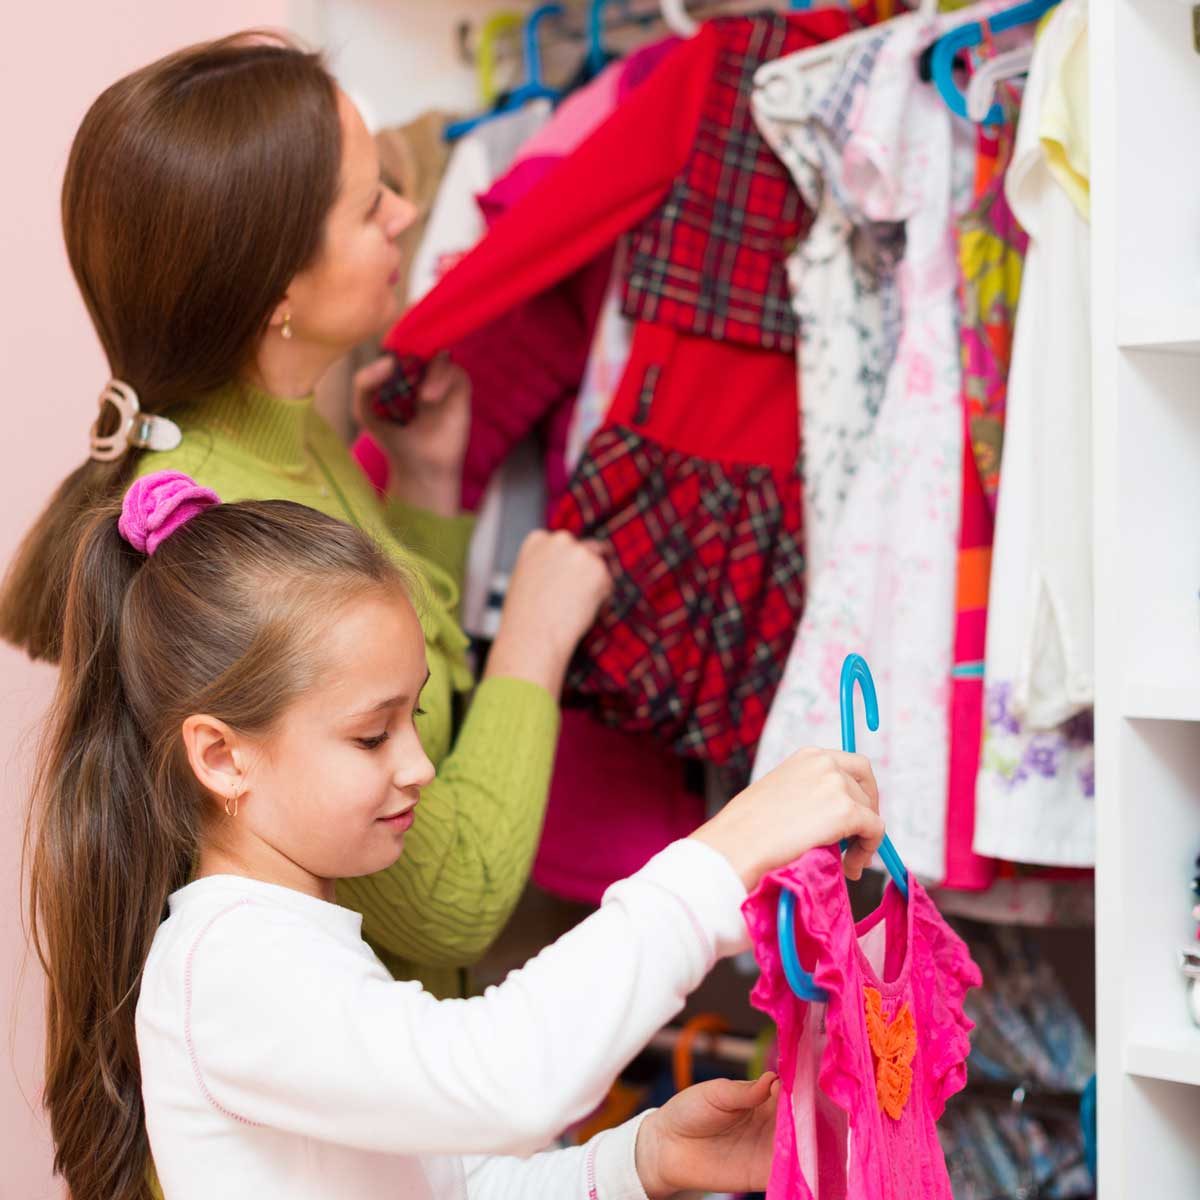 Mon and daughter organizing a closet